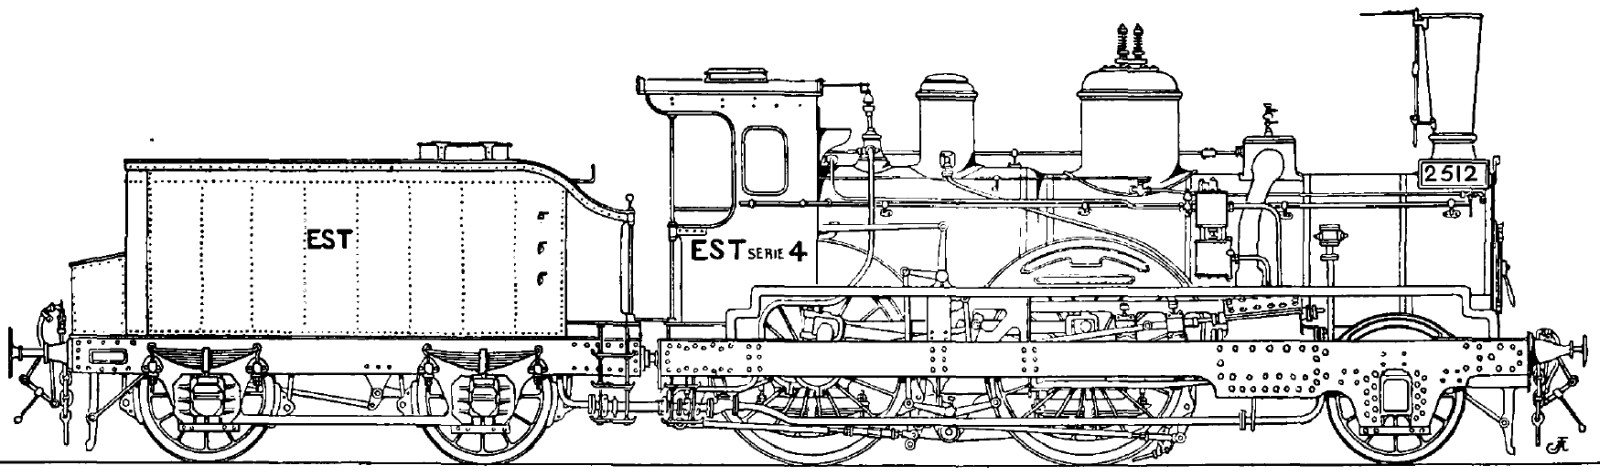 No. 512 (second batch) rebuilt with smaller wheels and new number 2512